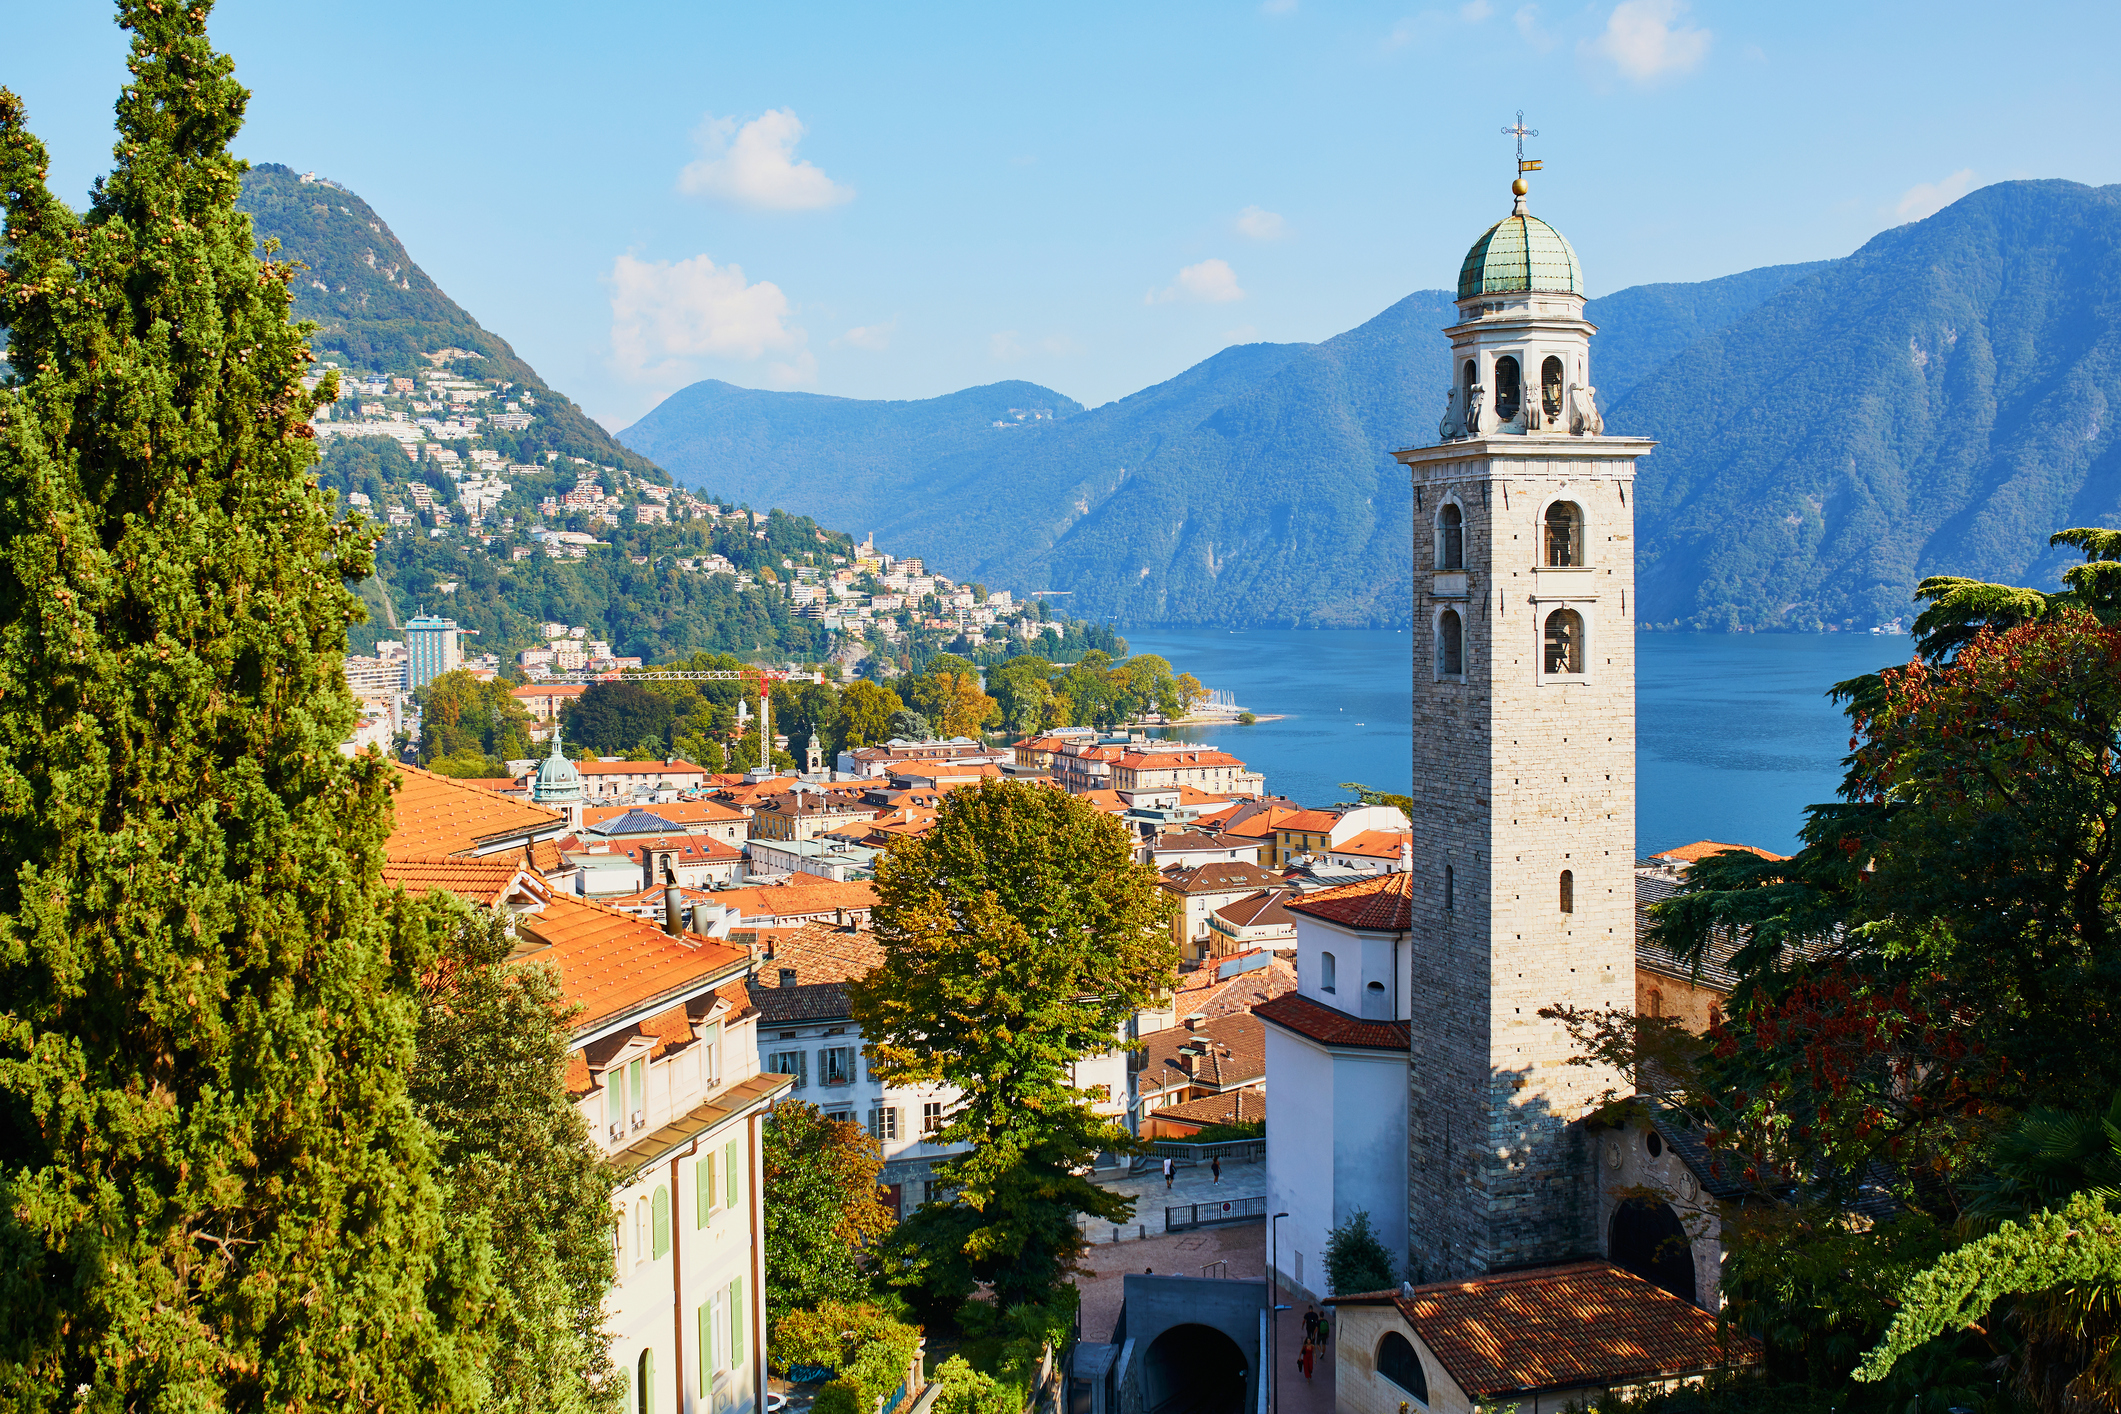 Old town of Lugano, canton of Ticino, Switzerland